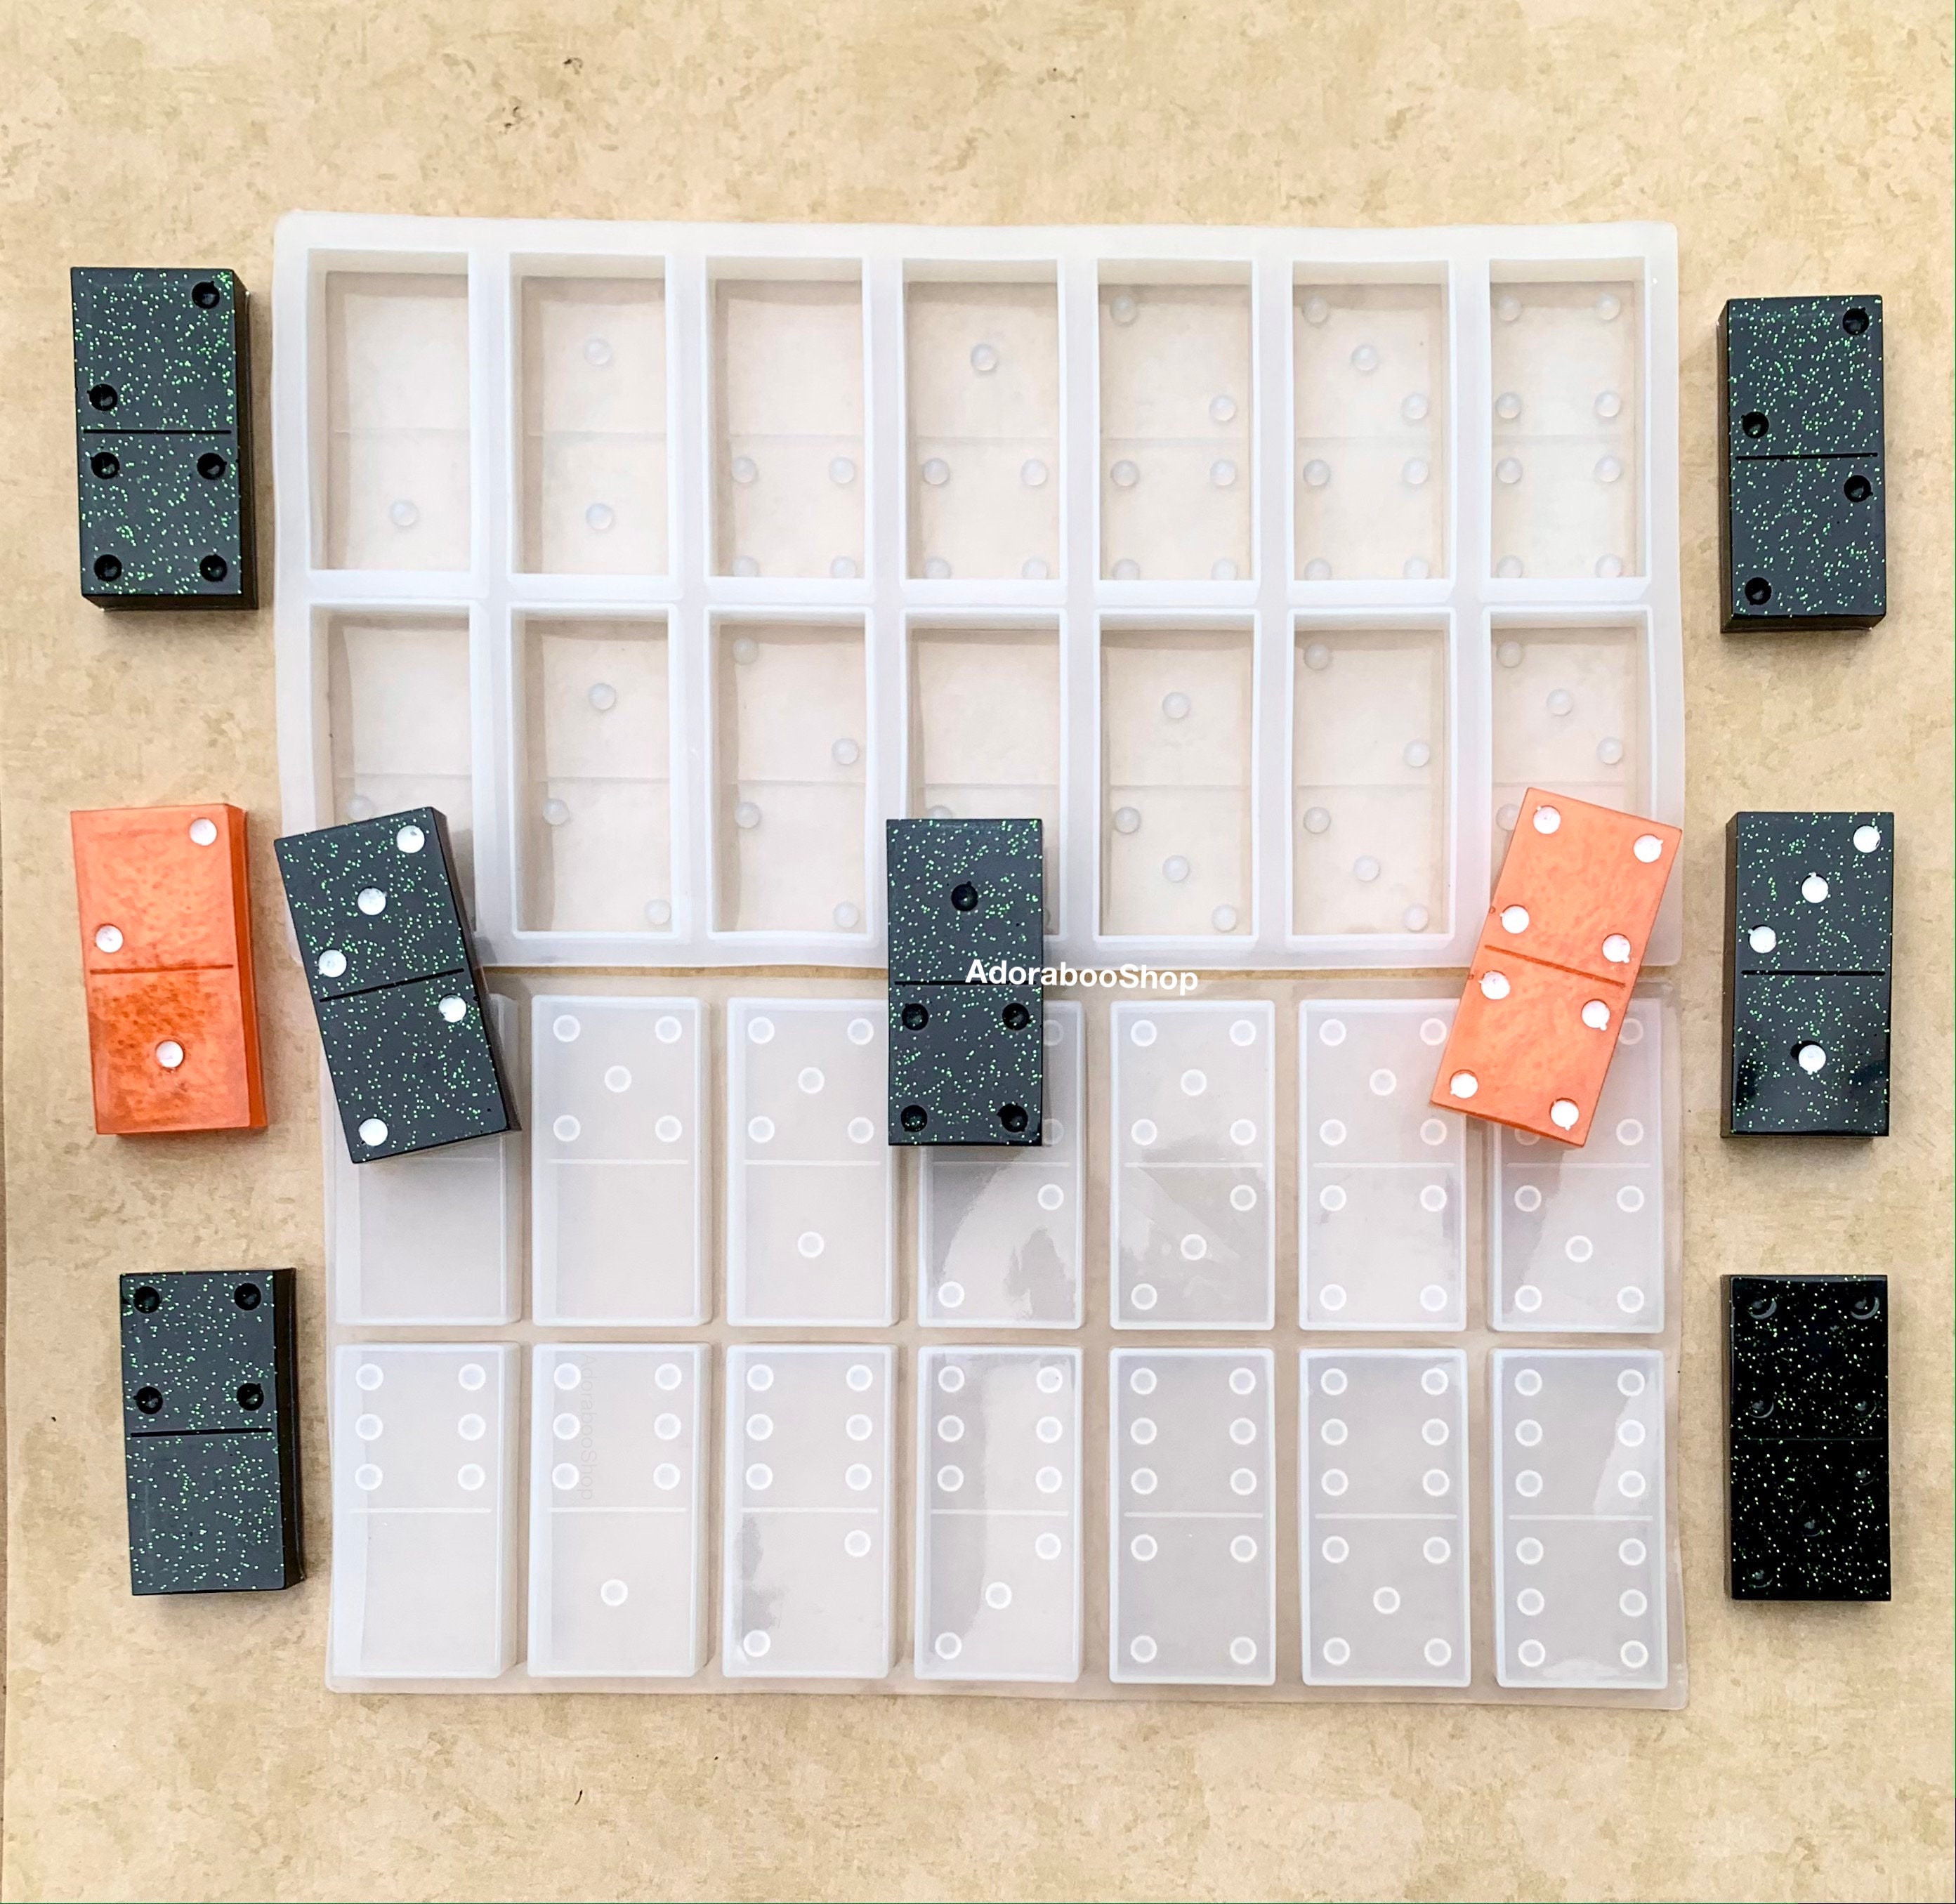 Domino Resin Mold, Domino Silicone Mold for Resin, Board Game Mold, DIY Domino  Resin Mold, 28 Dominoes Cavities Mold 